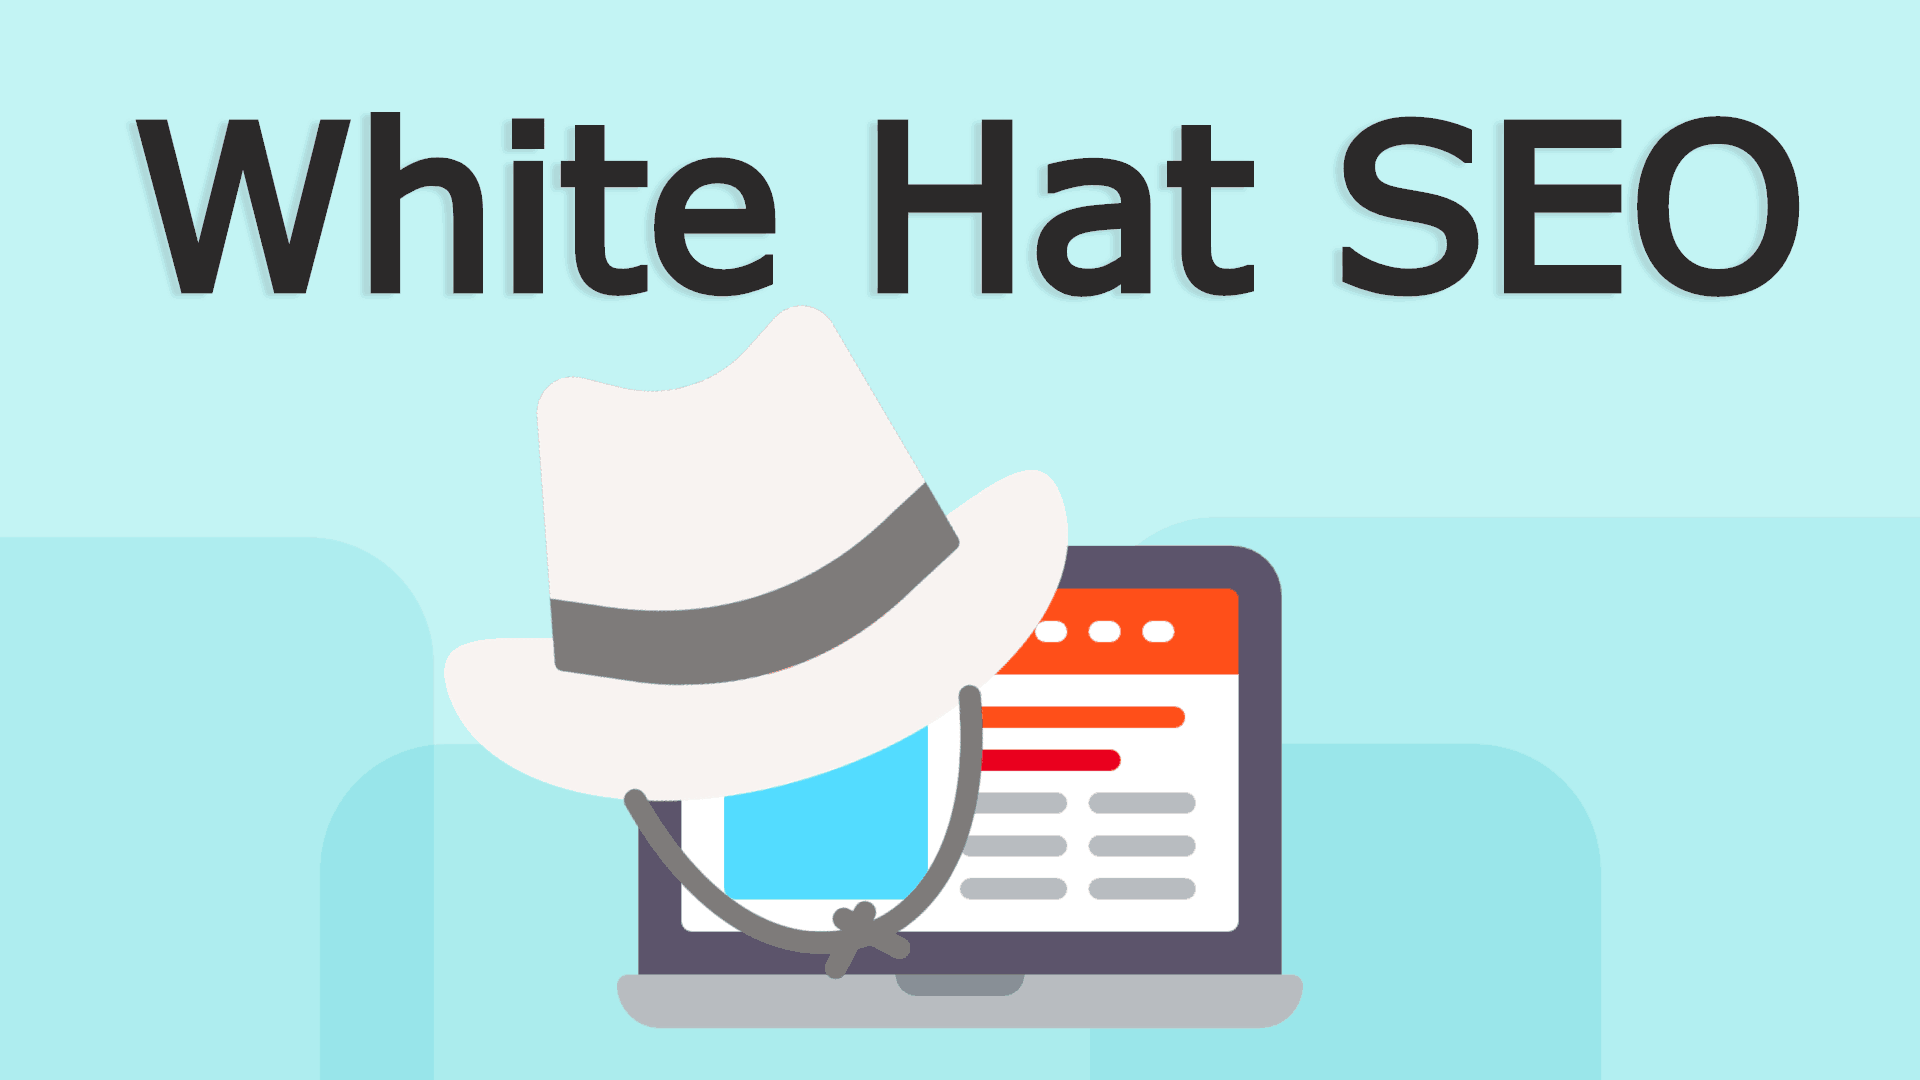 What is White Hat Seo?